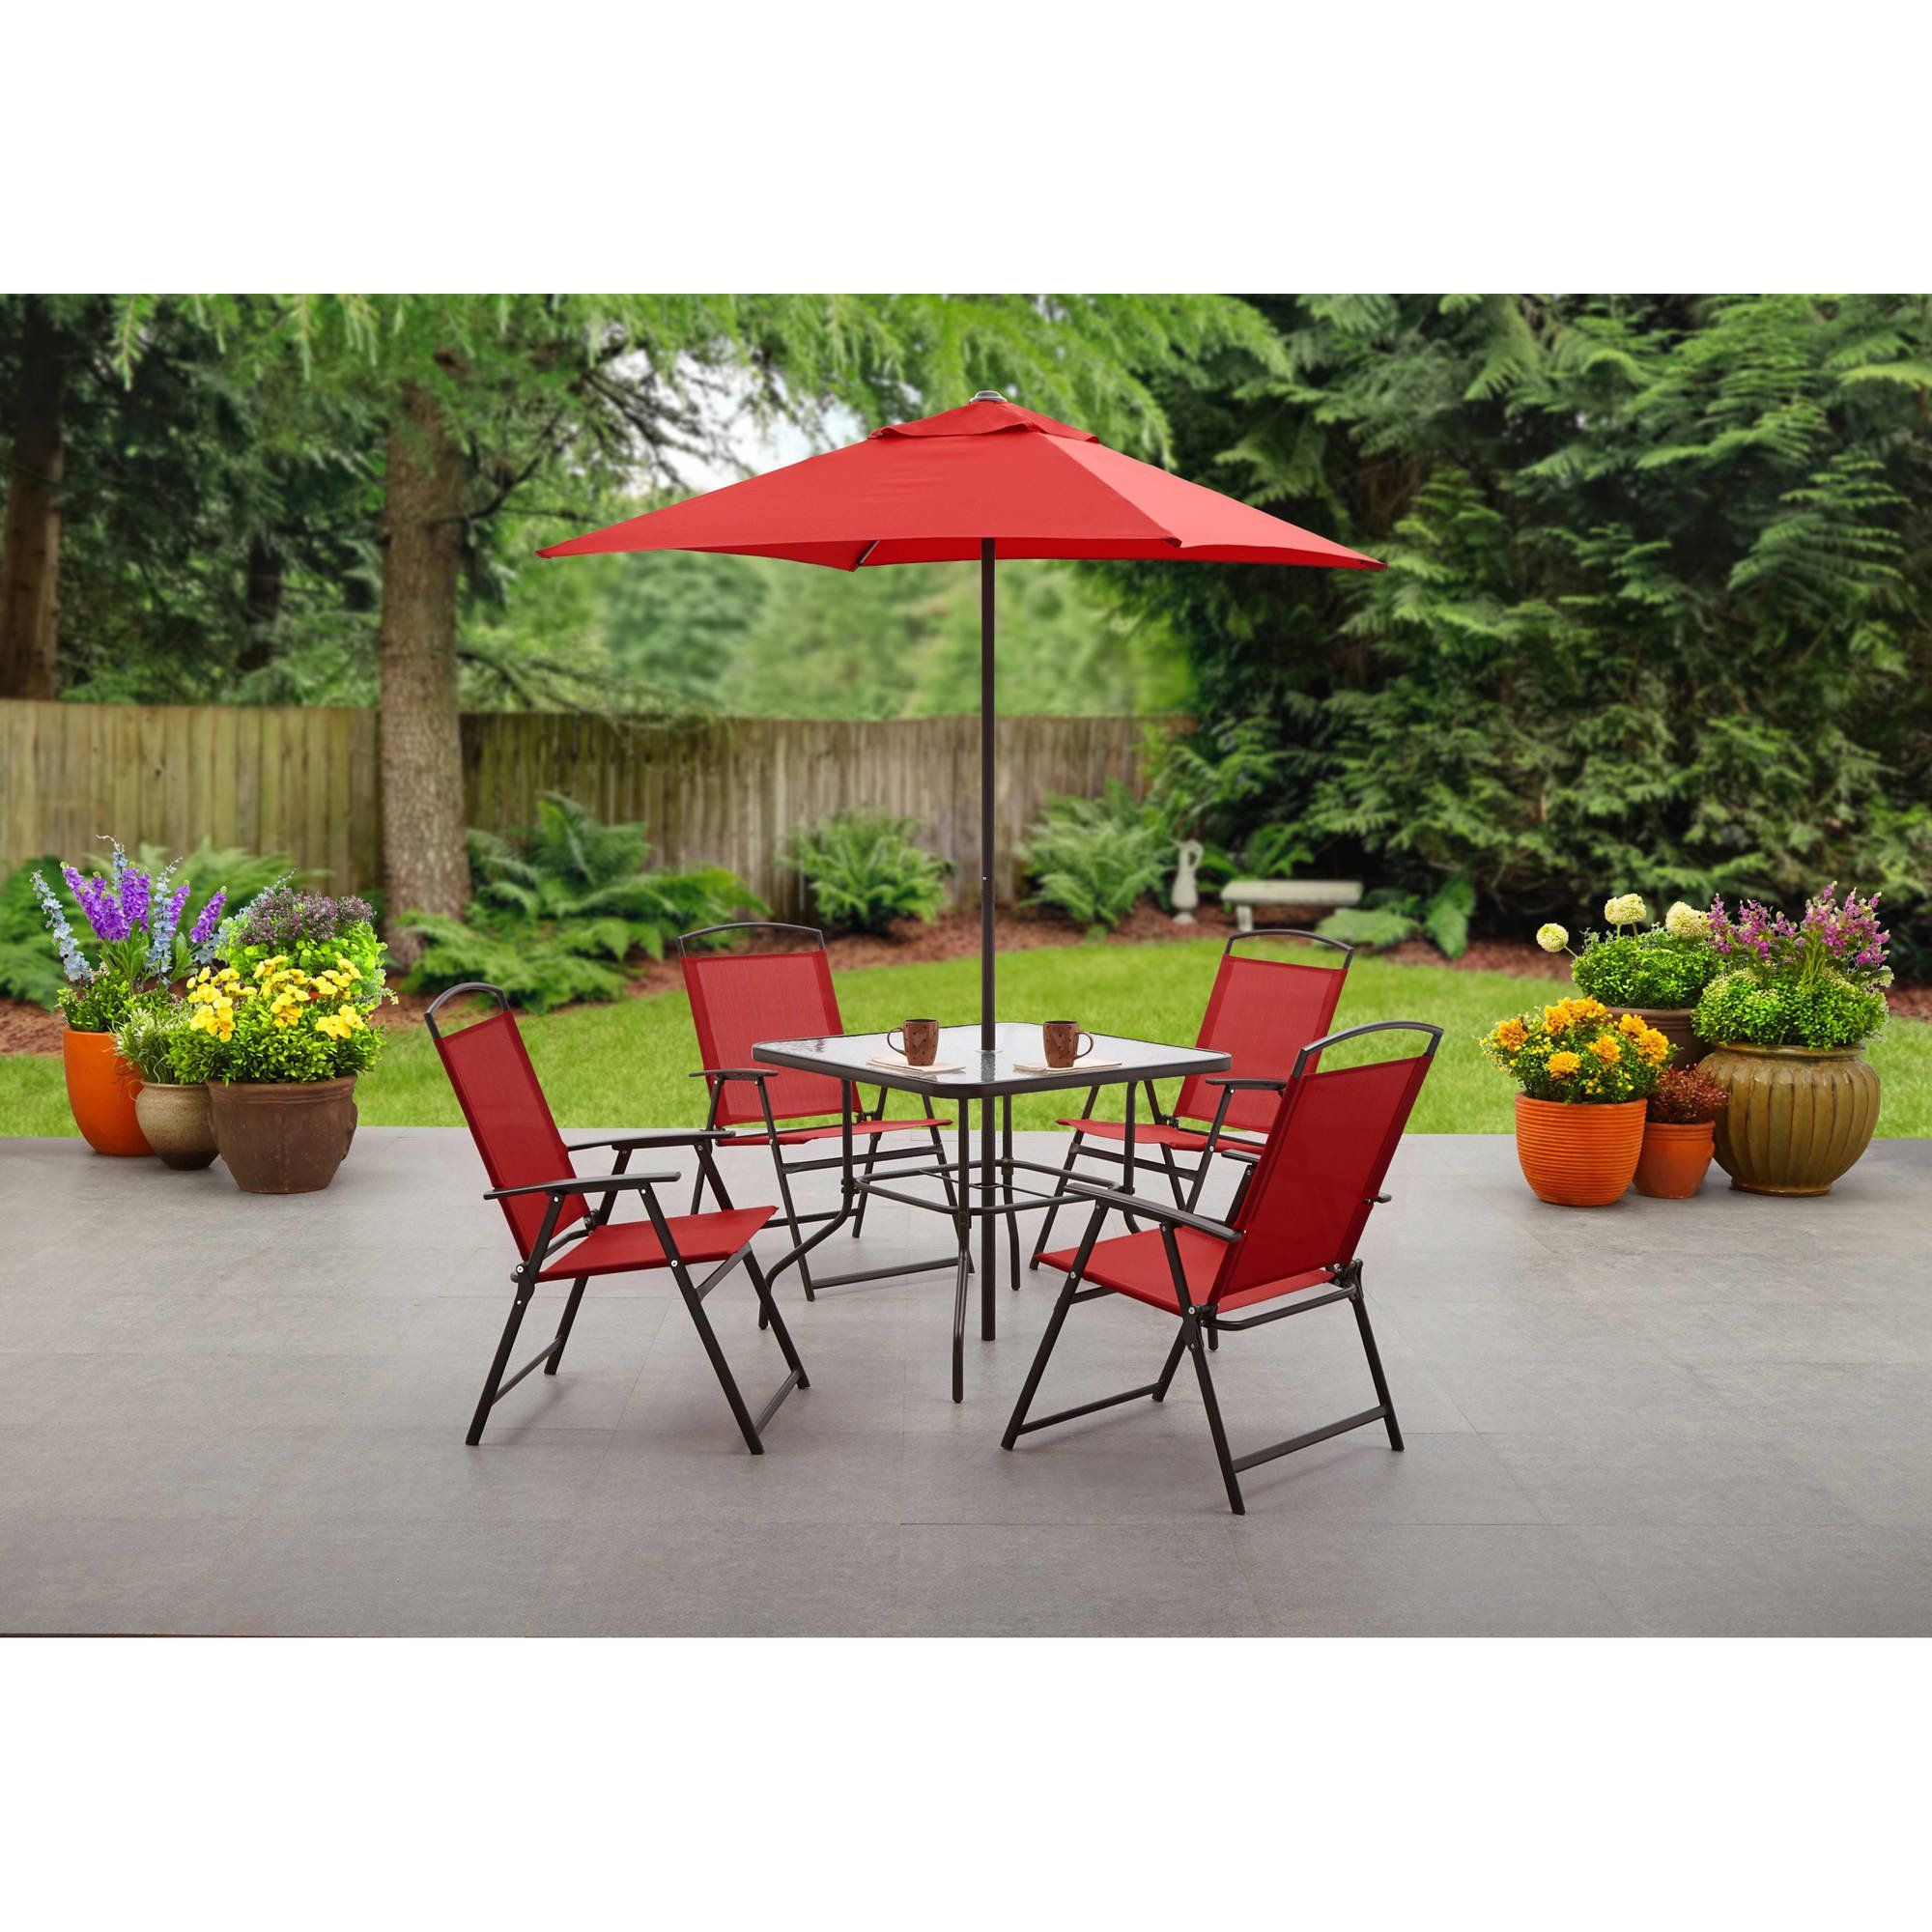 Mainstays Albany Lane 6 Piece Outdoor Patio Dining Set, Red | Walmart (US)